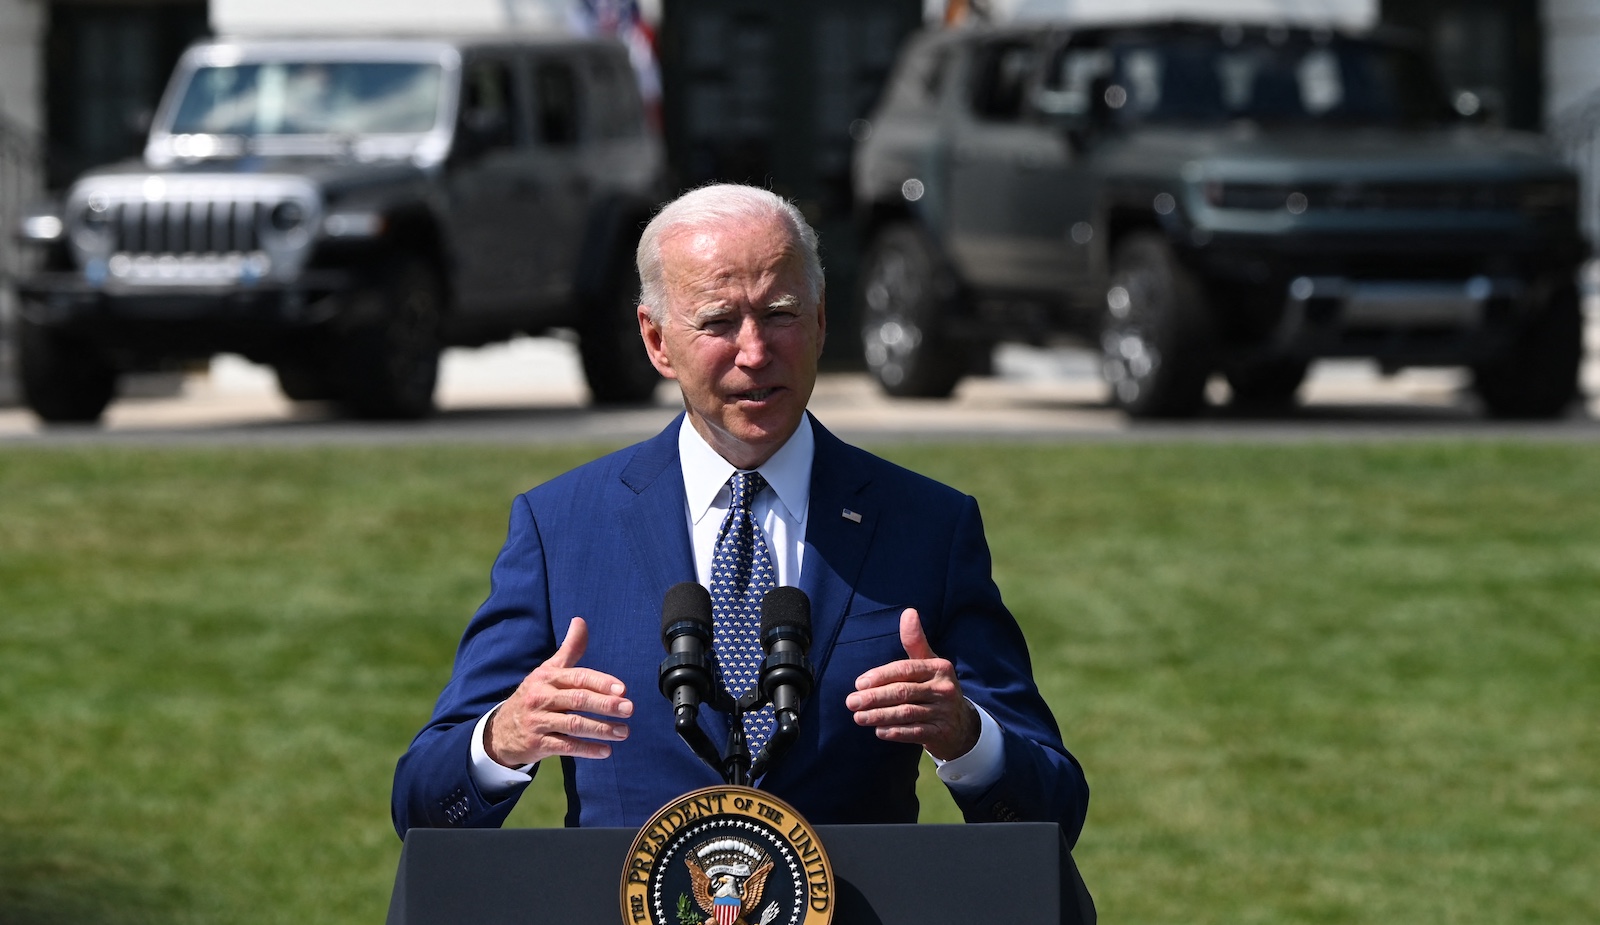 Biden stands in front of two electric vehicles.